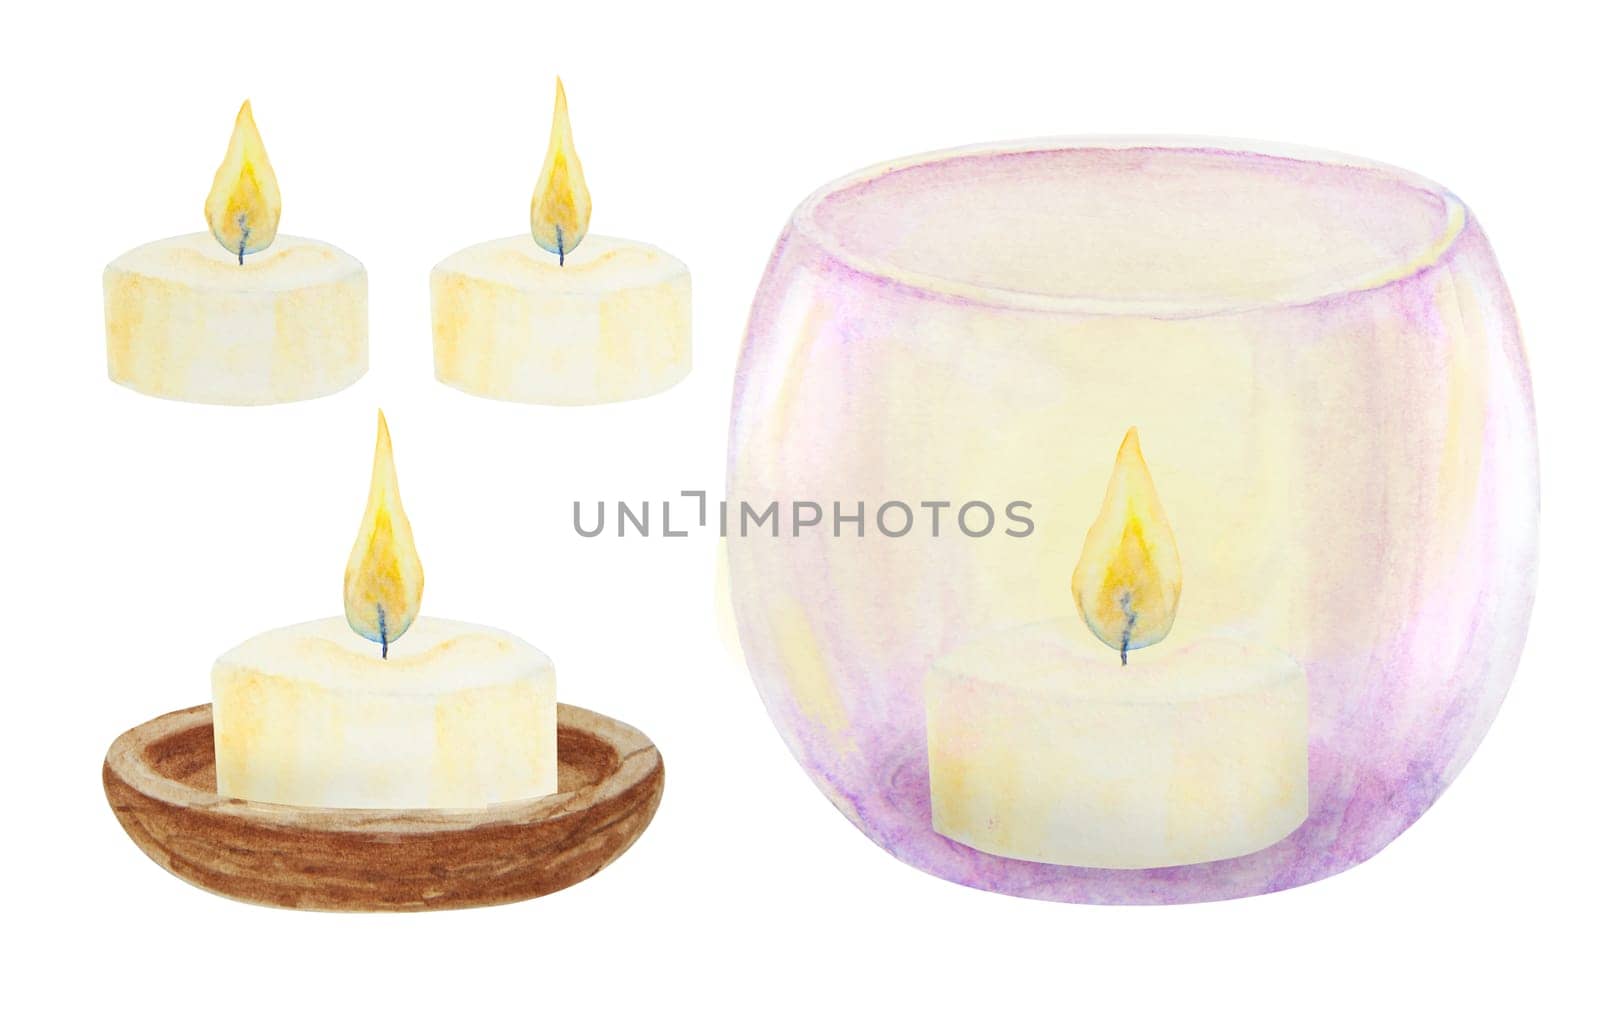 Set of violet glass and wooden candlesticks, candles. Hand drawn watercolor illustration. Good for event, Christmas decoration, romantic, wedding, interior designs